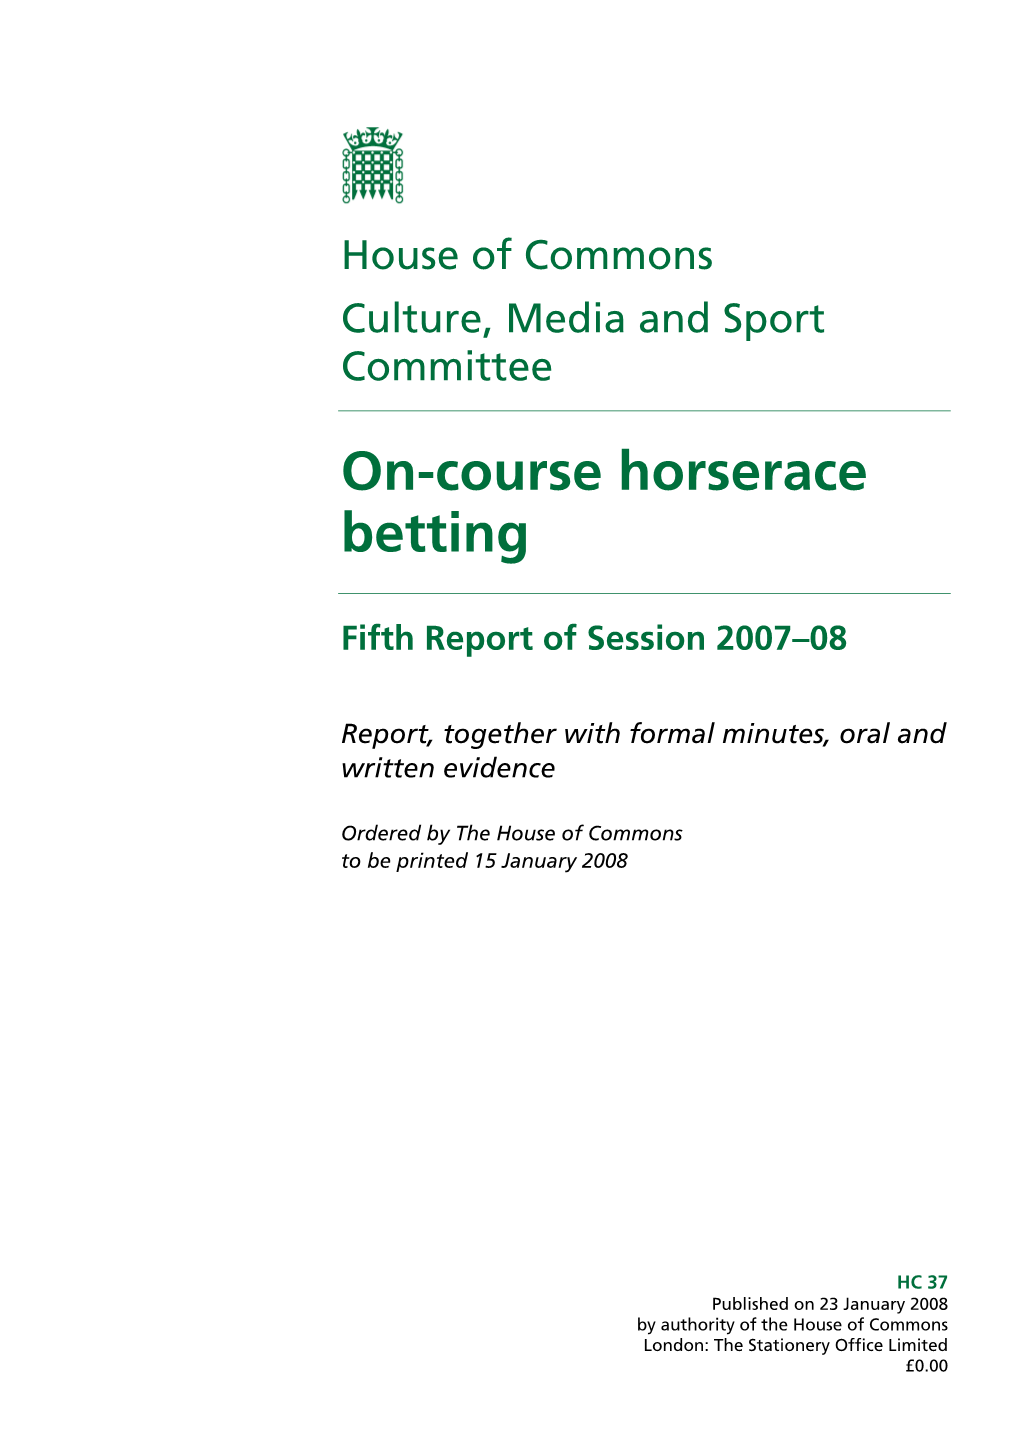 On-Course Horserace Betting